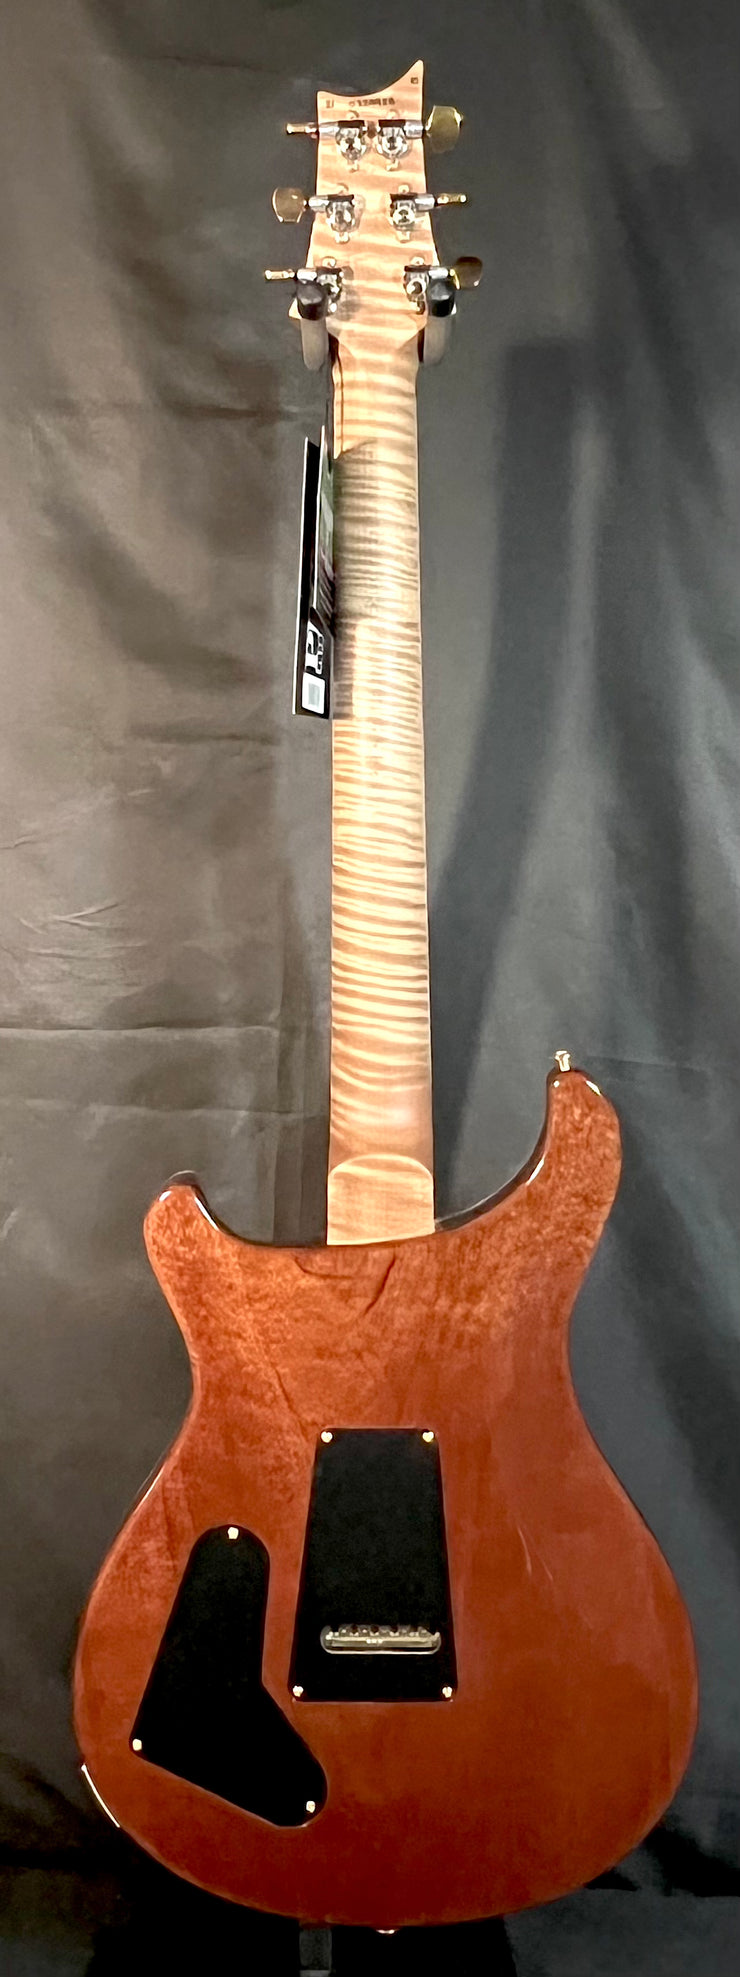 NEW PRS Special  22 - 10 Top